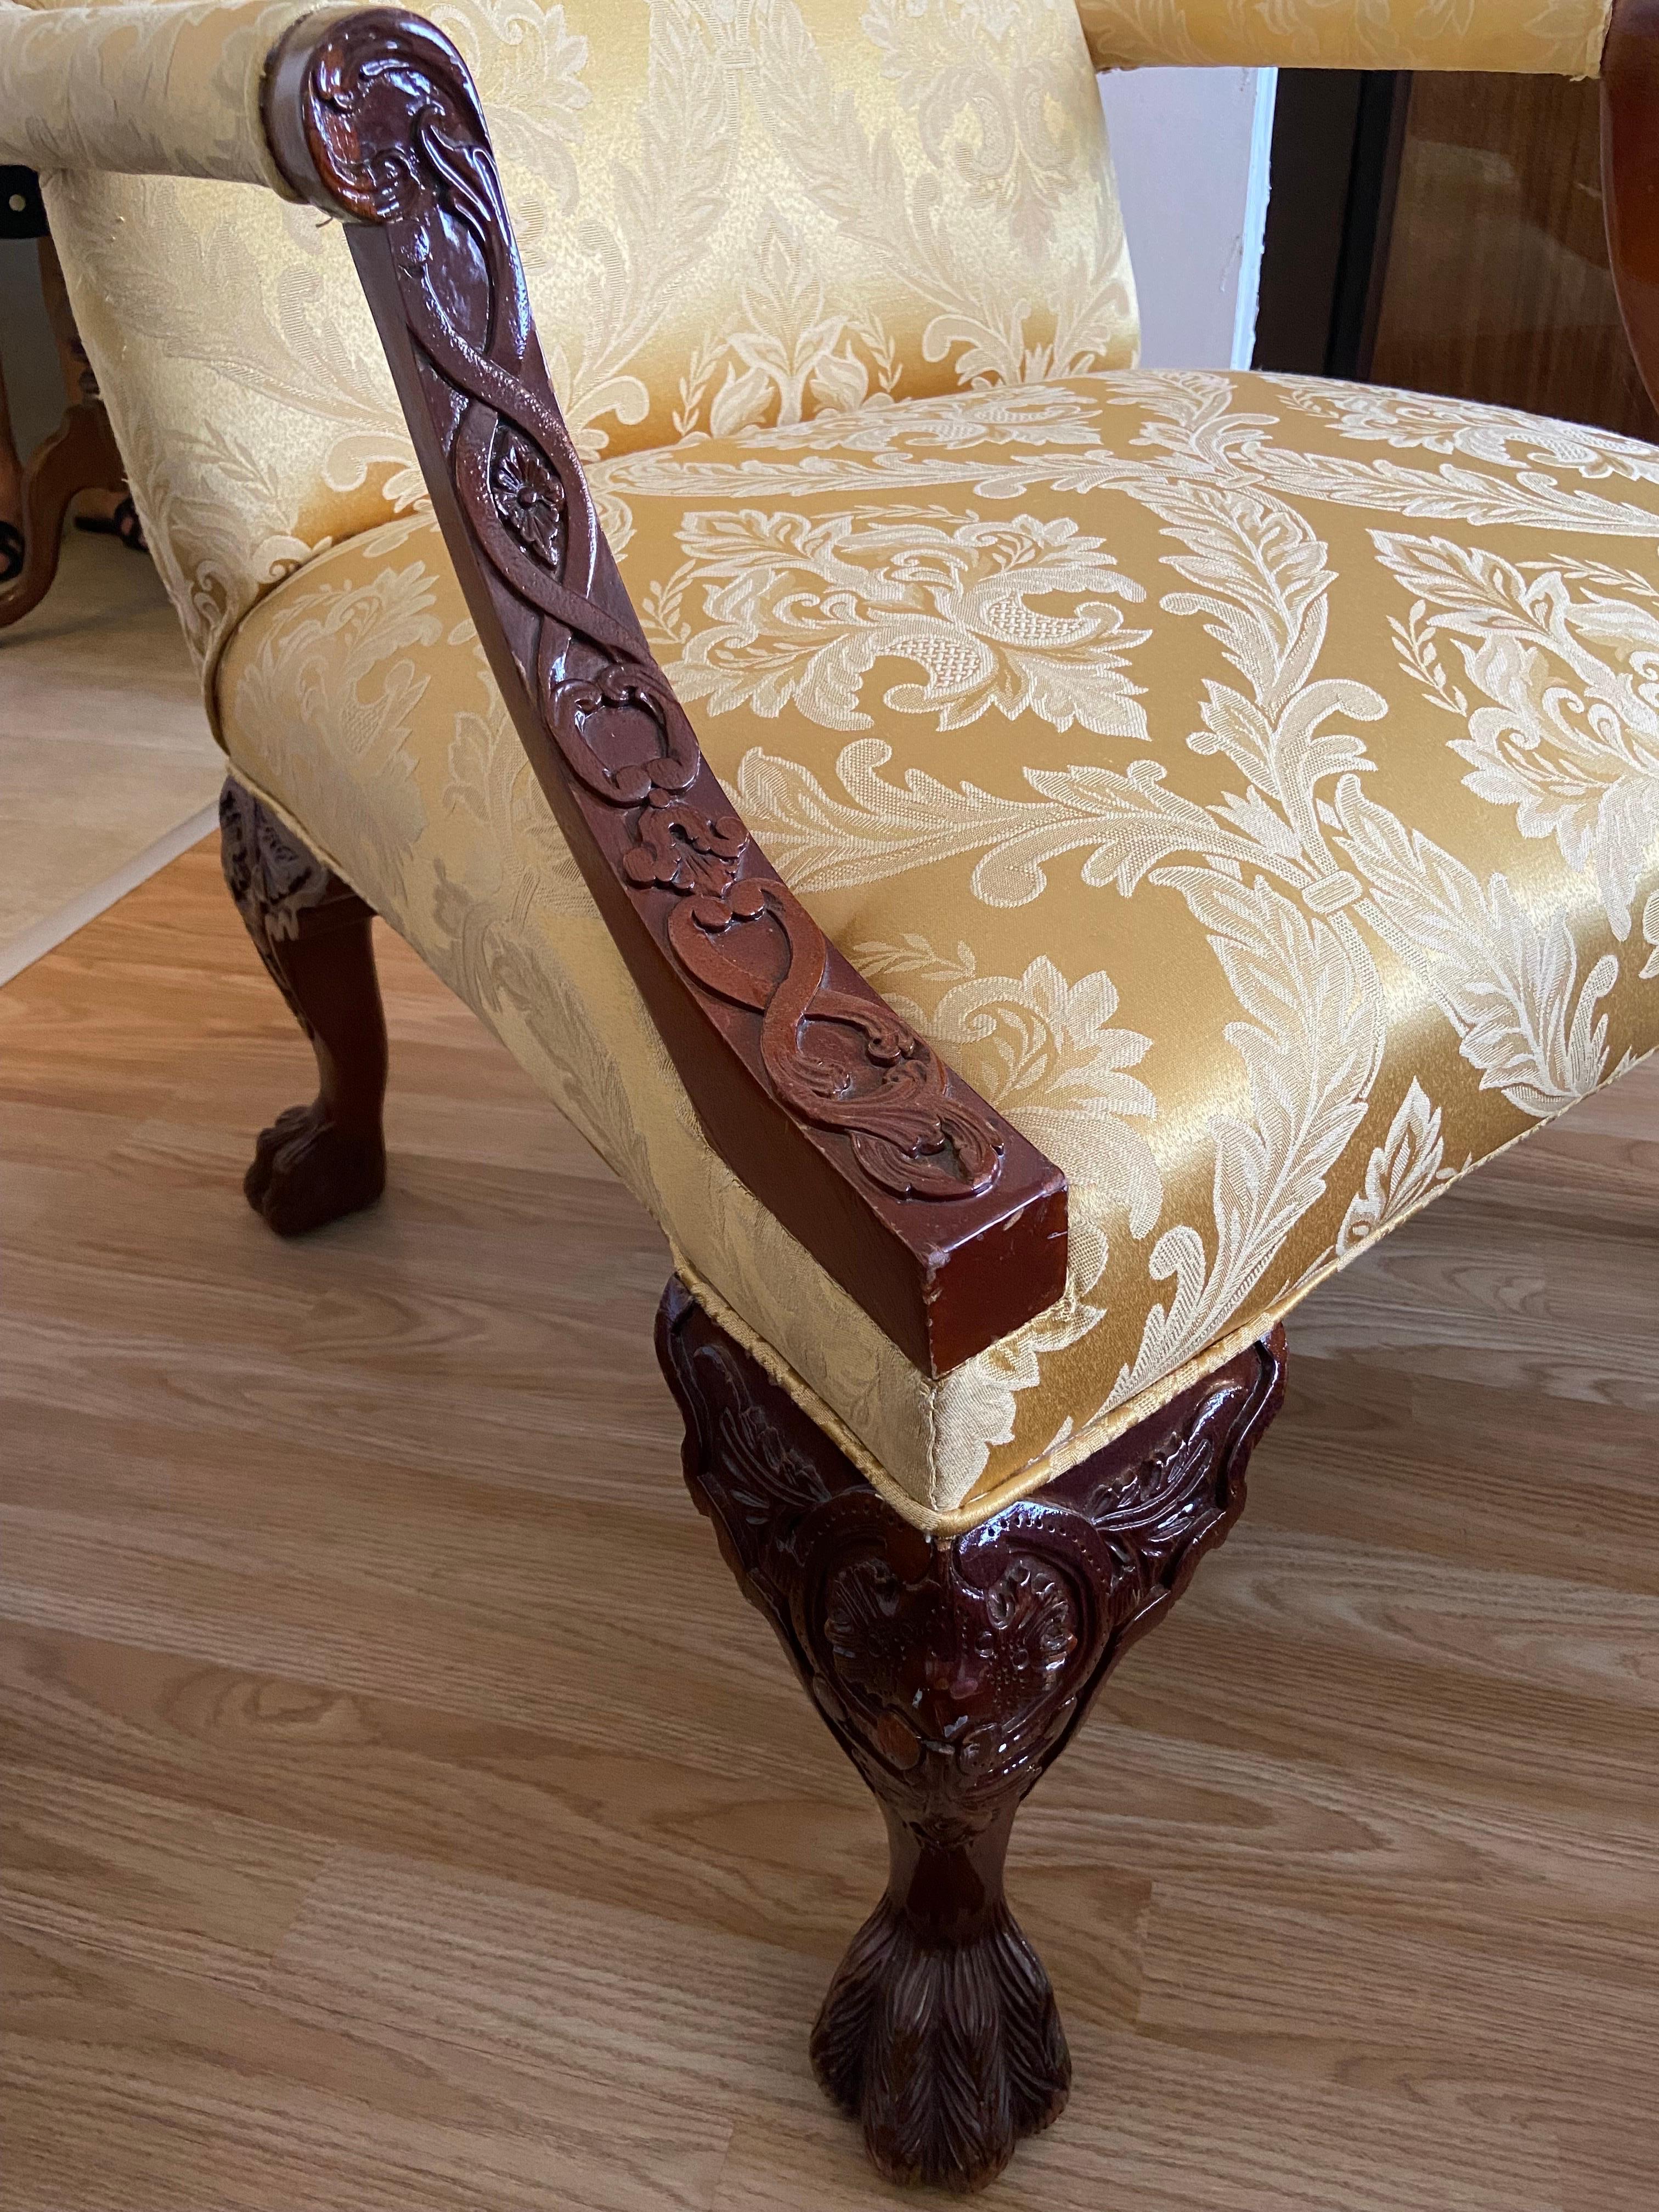 Grand hand carved mahogany armchairs in yellow silk upholstery made in late 20th century. Very comfortable and in good condition.
   